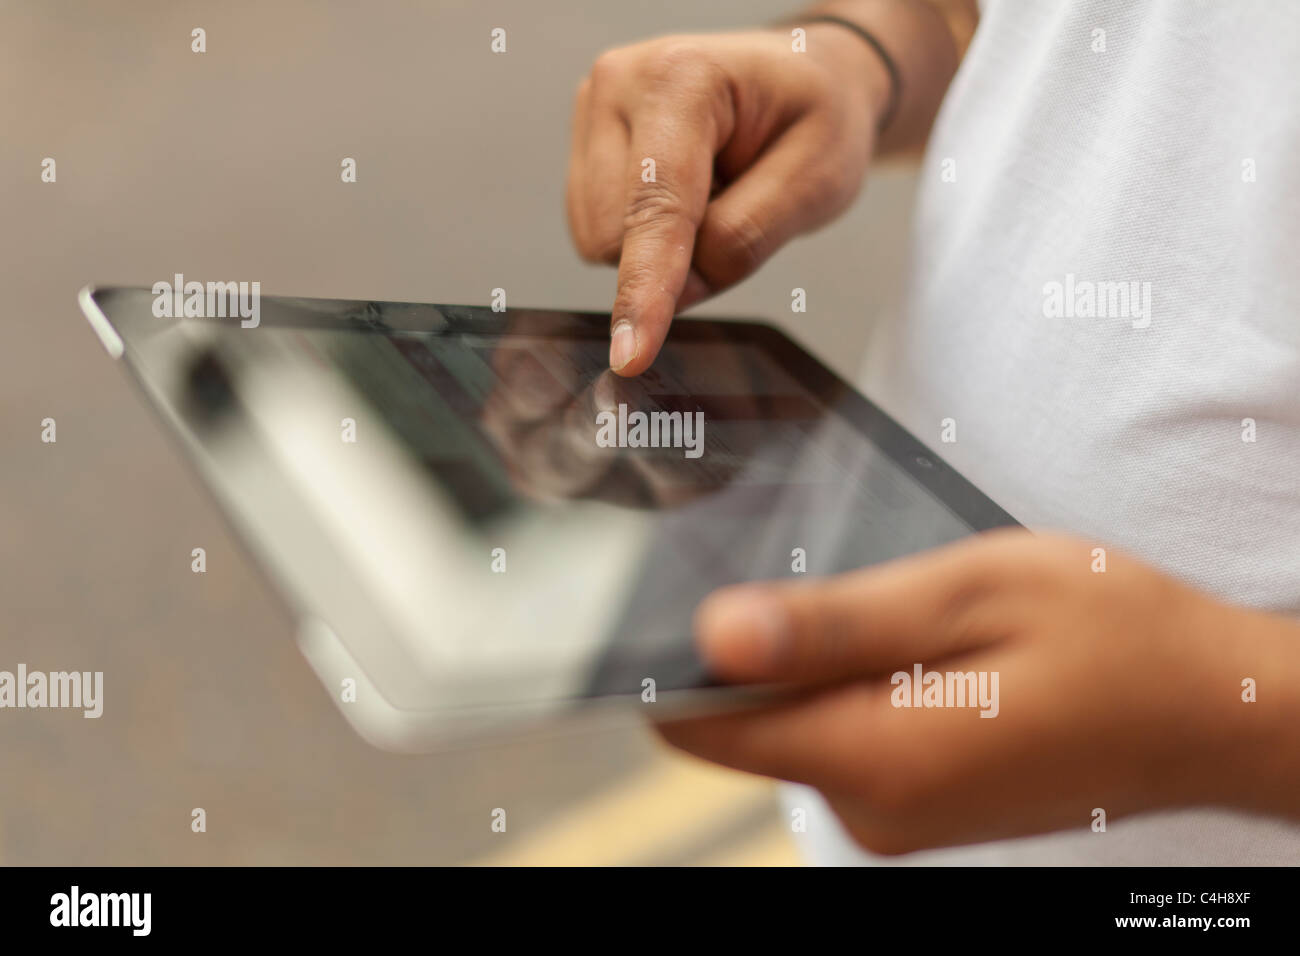 Person  using an I pad 2 device-Close-up Stock Photo